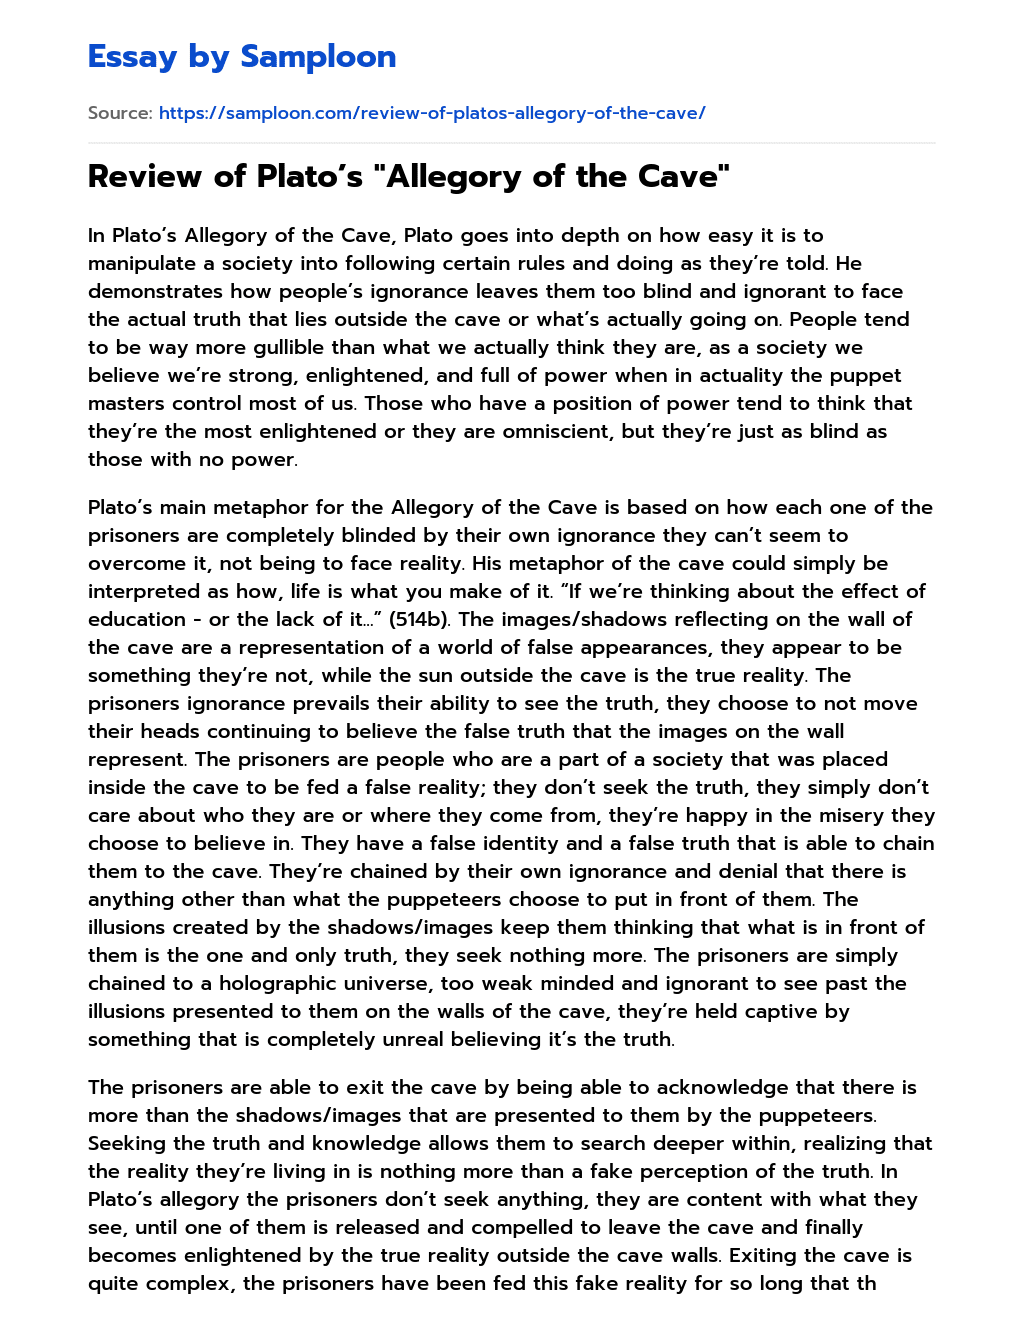 Review of Plato’s “Allegory of the Cave” essay